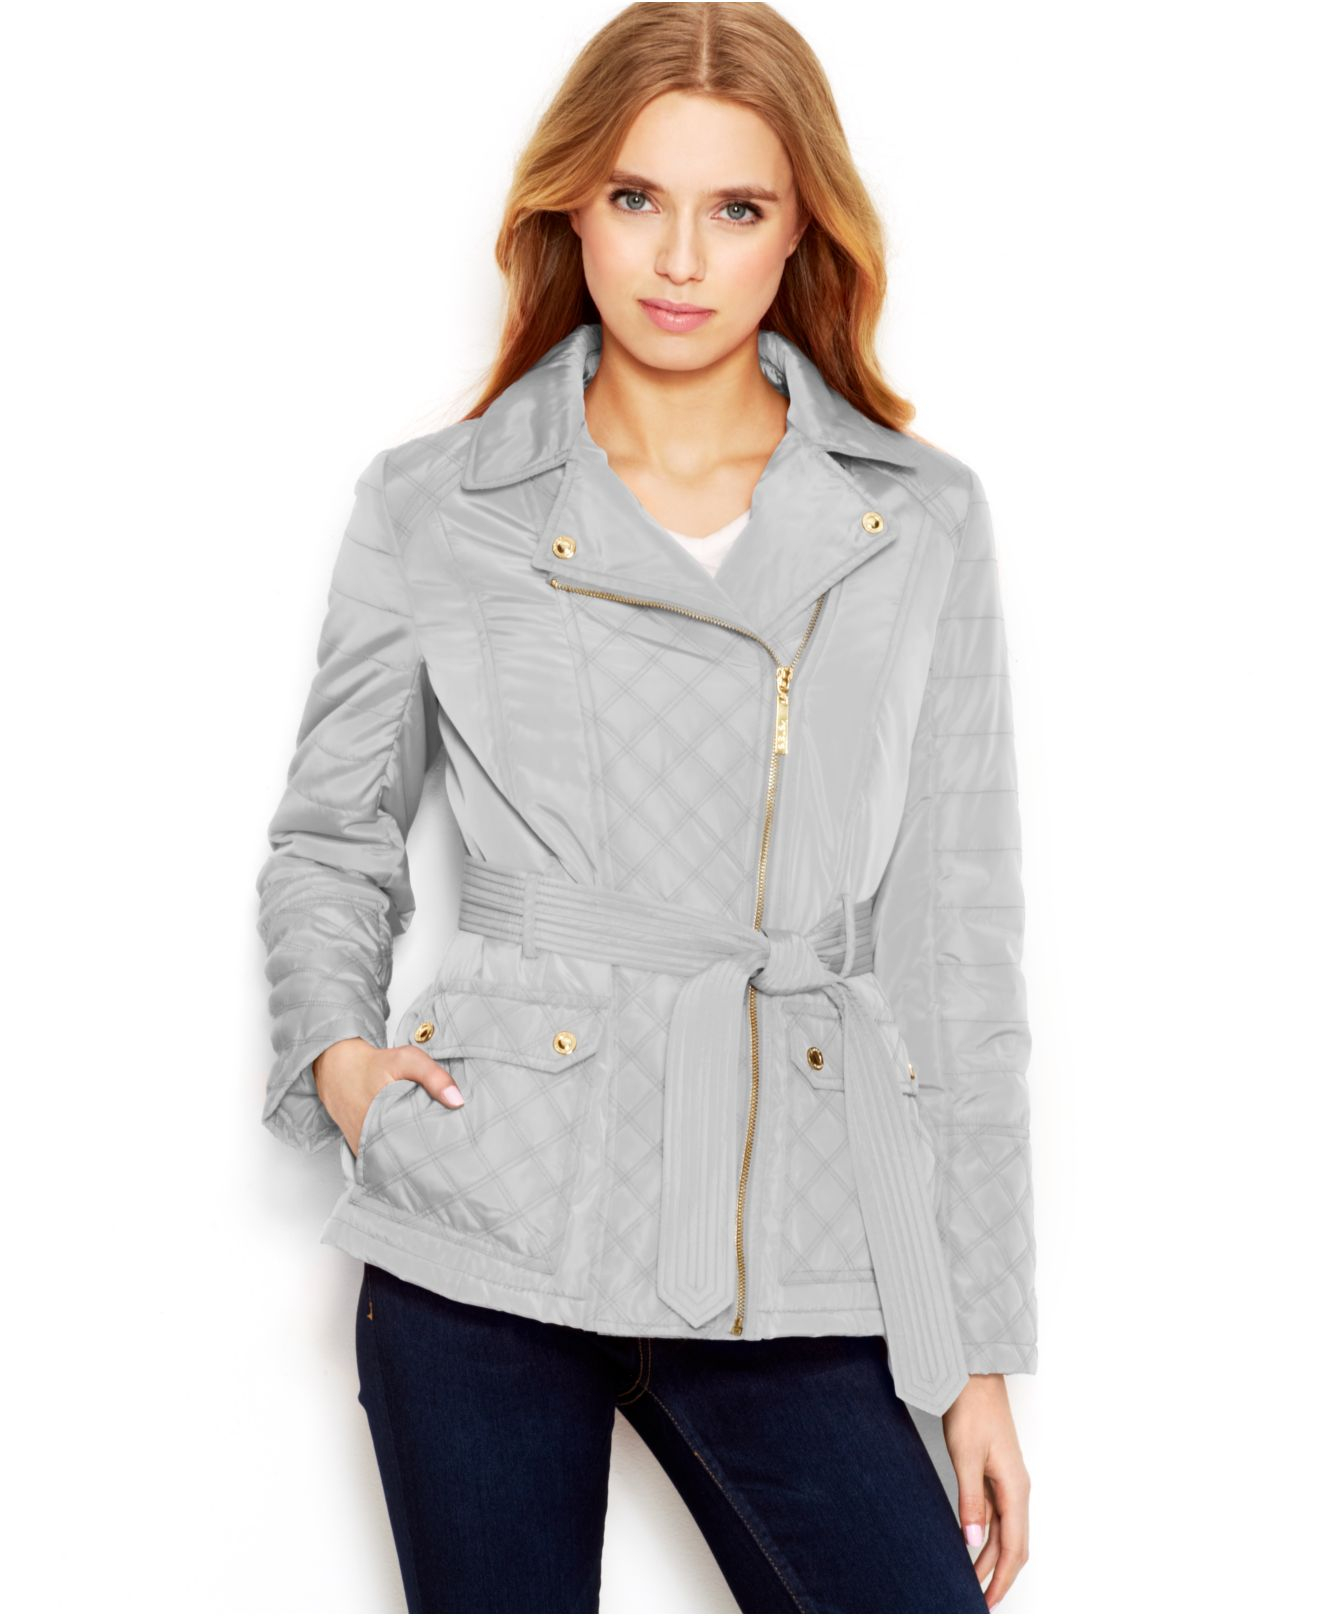 Kensie Quilted Utility Jacket in Ice (Gray) - Lyst